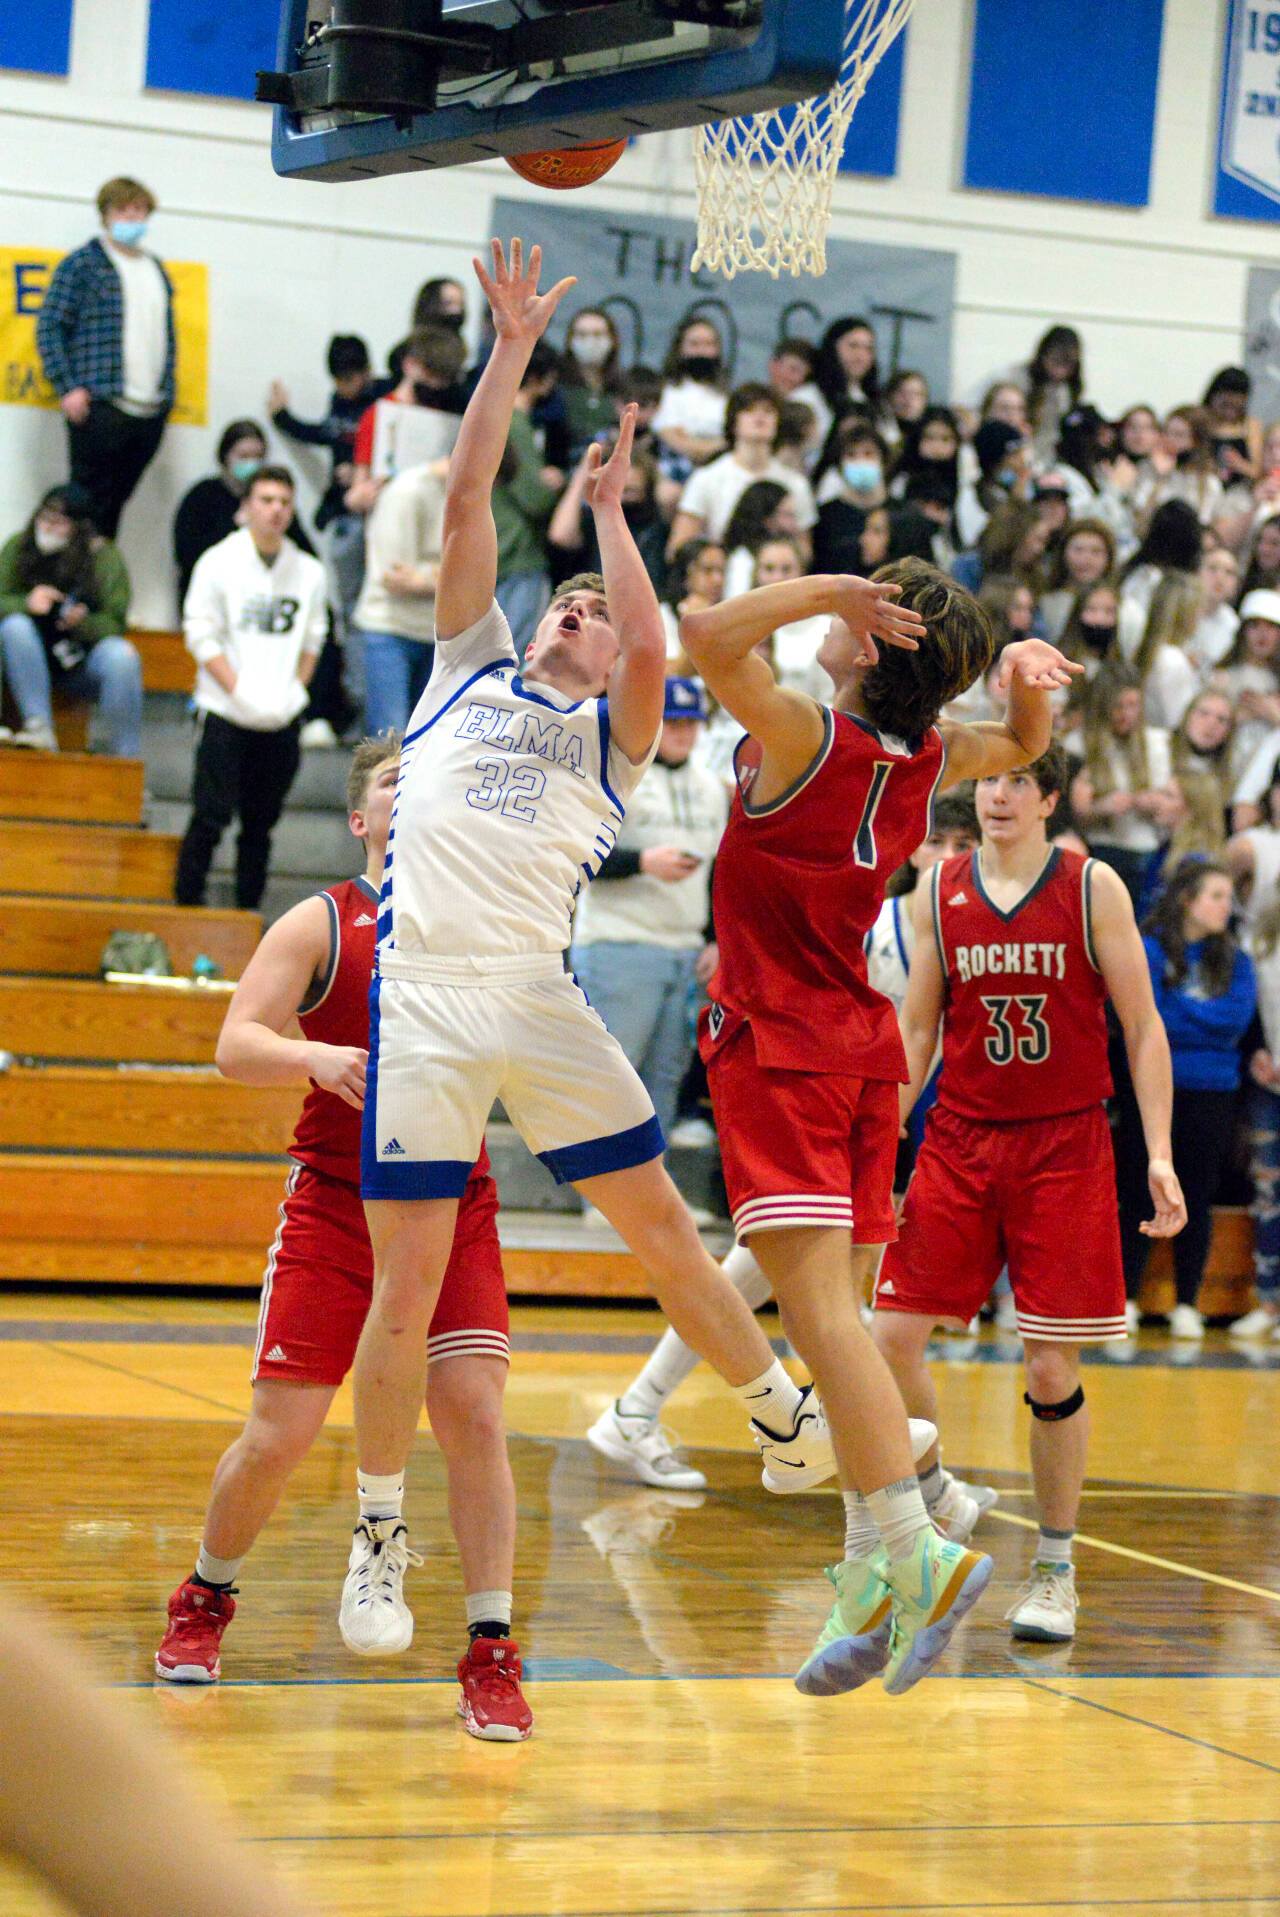 RYAN SPARKS | THE DAILY WORLD Elma’s Jerred Bailey (32) scores while being defended by Castle Rock’s Trystin Marin (1) during the Eagles’ 57-47 loss in the 1A District 4 Tournament on Thursday in Elma.